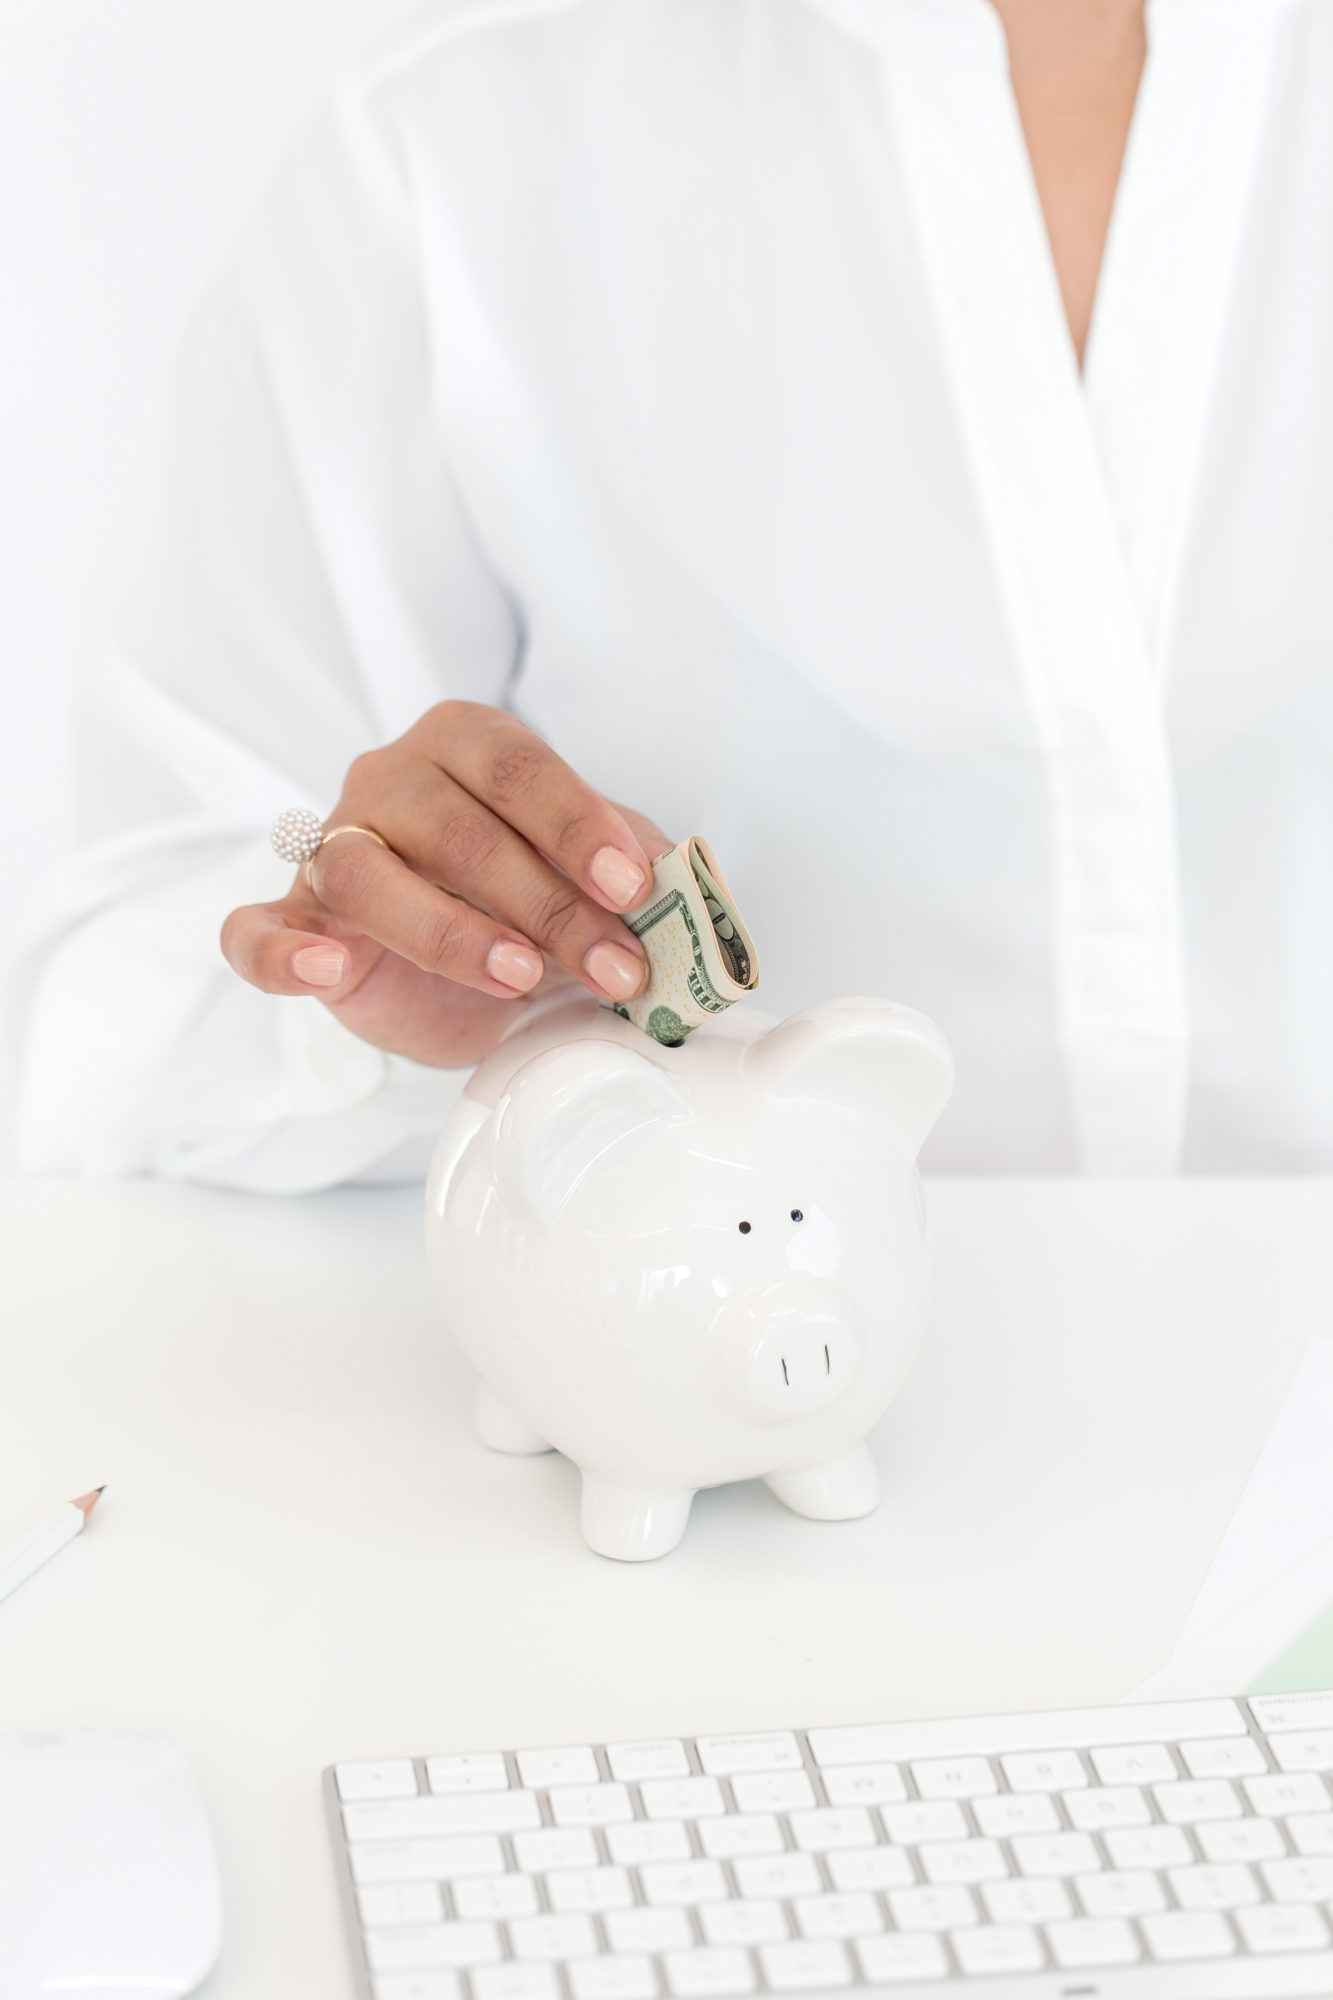 Woman placing money in a white piggy bank